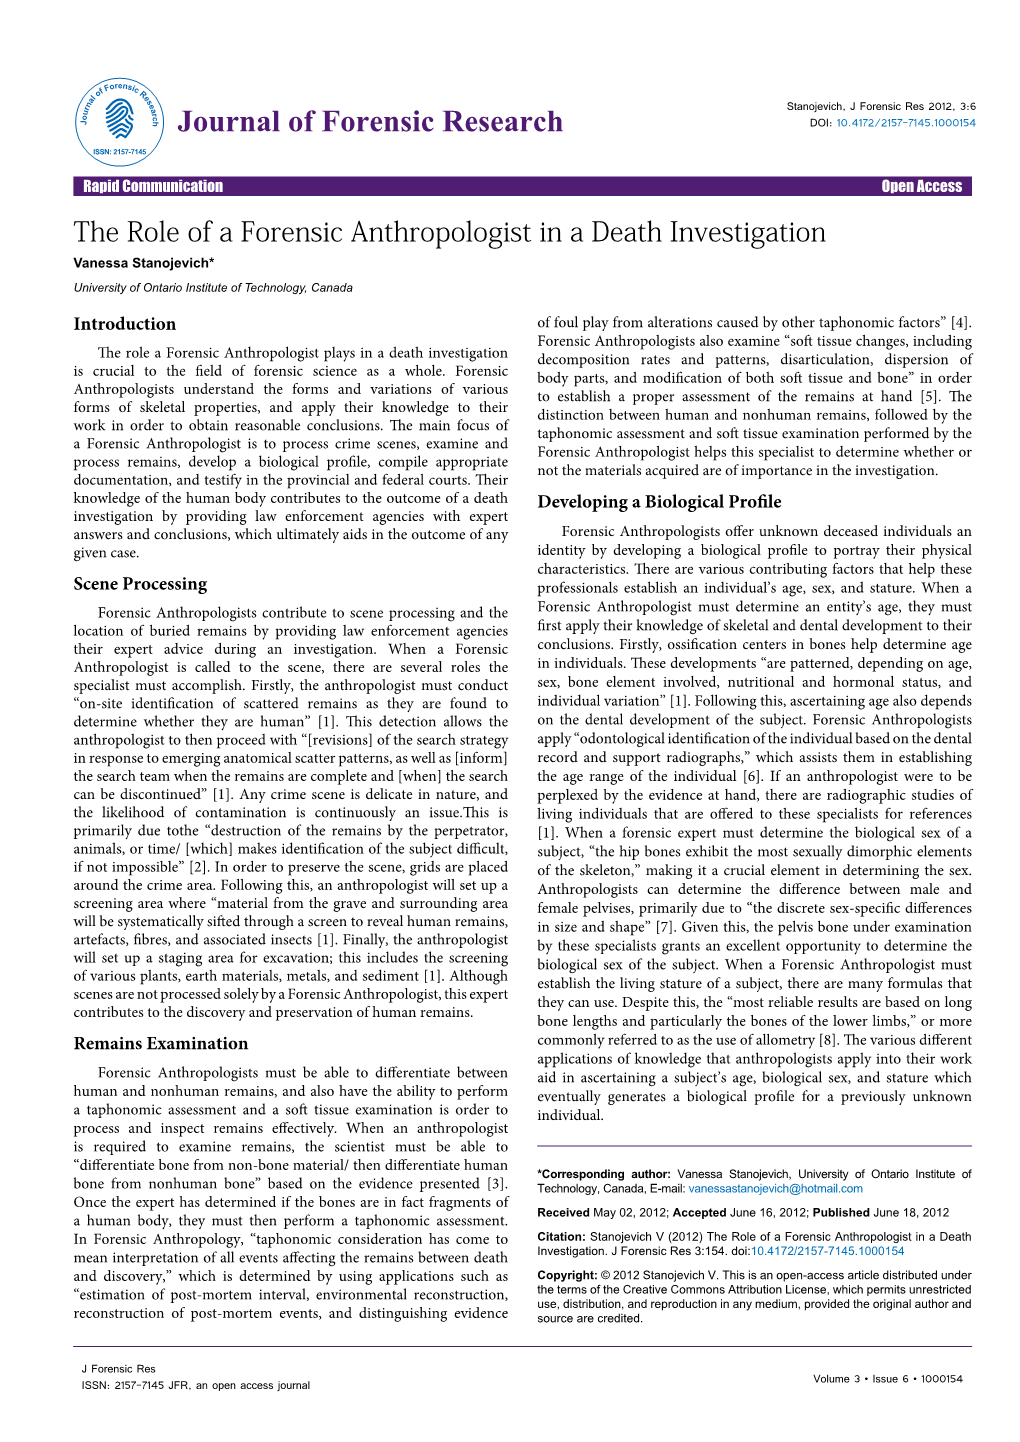 The Role of a Forensic Anthropologist in a Death Investigation Vanessa Stanojevich* University of Ontario Institute of Technology, Canada